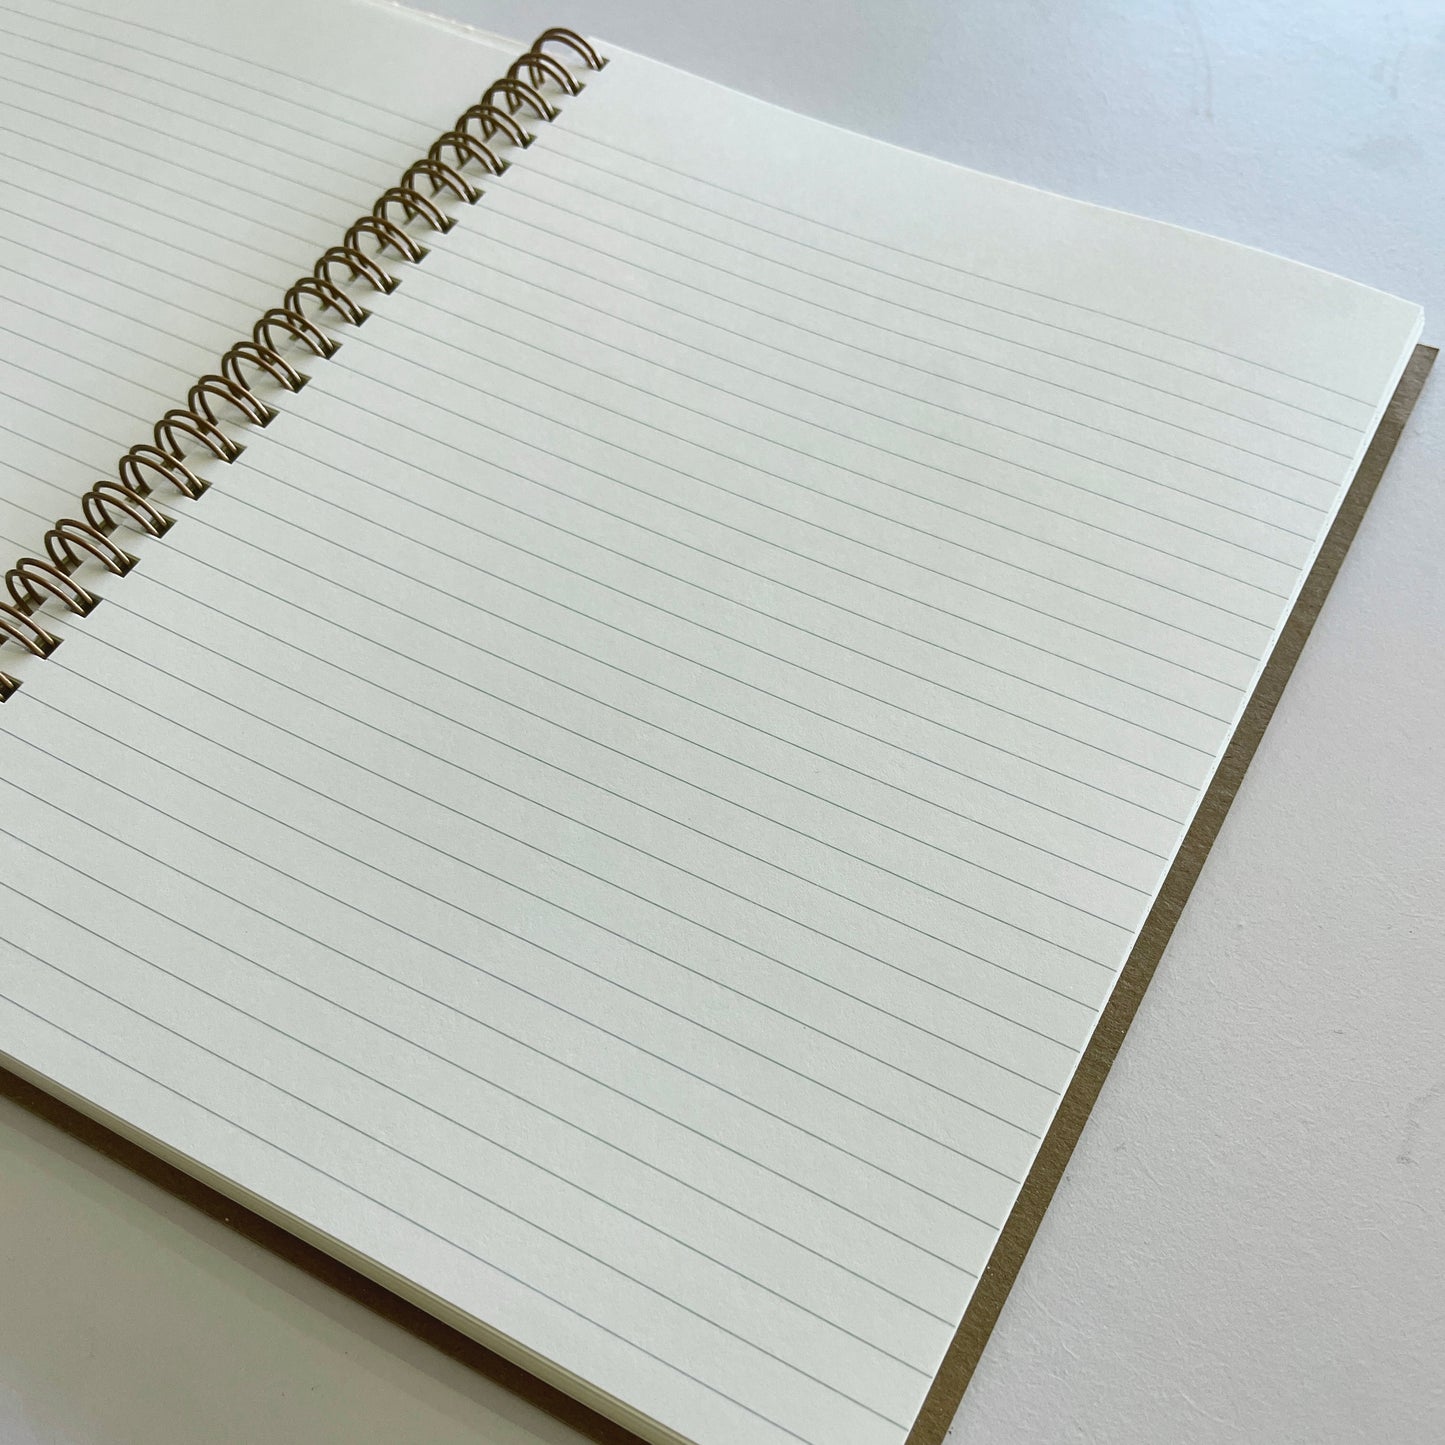 Signature Journal: Lined Notebook